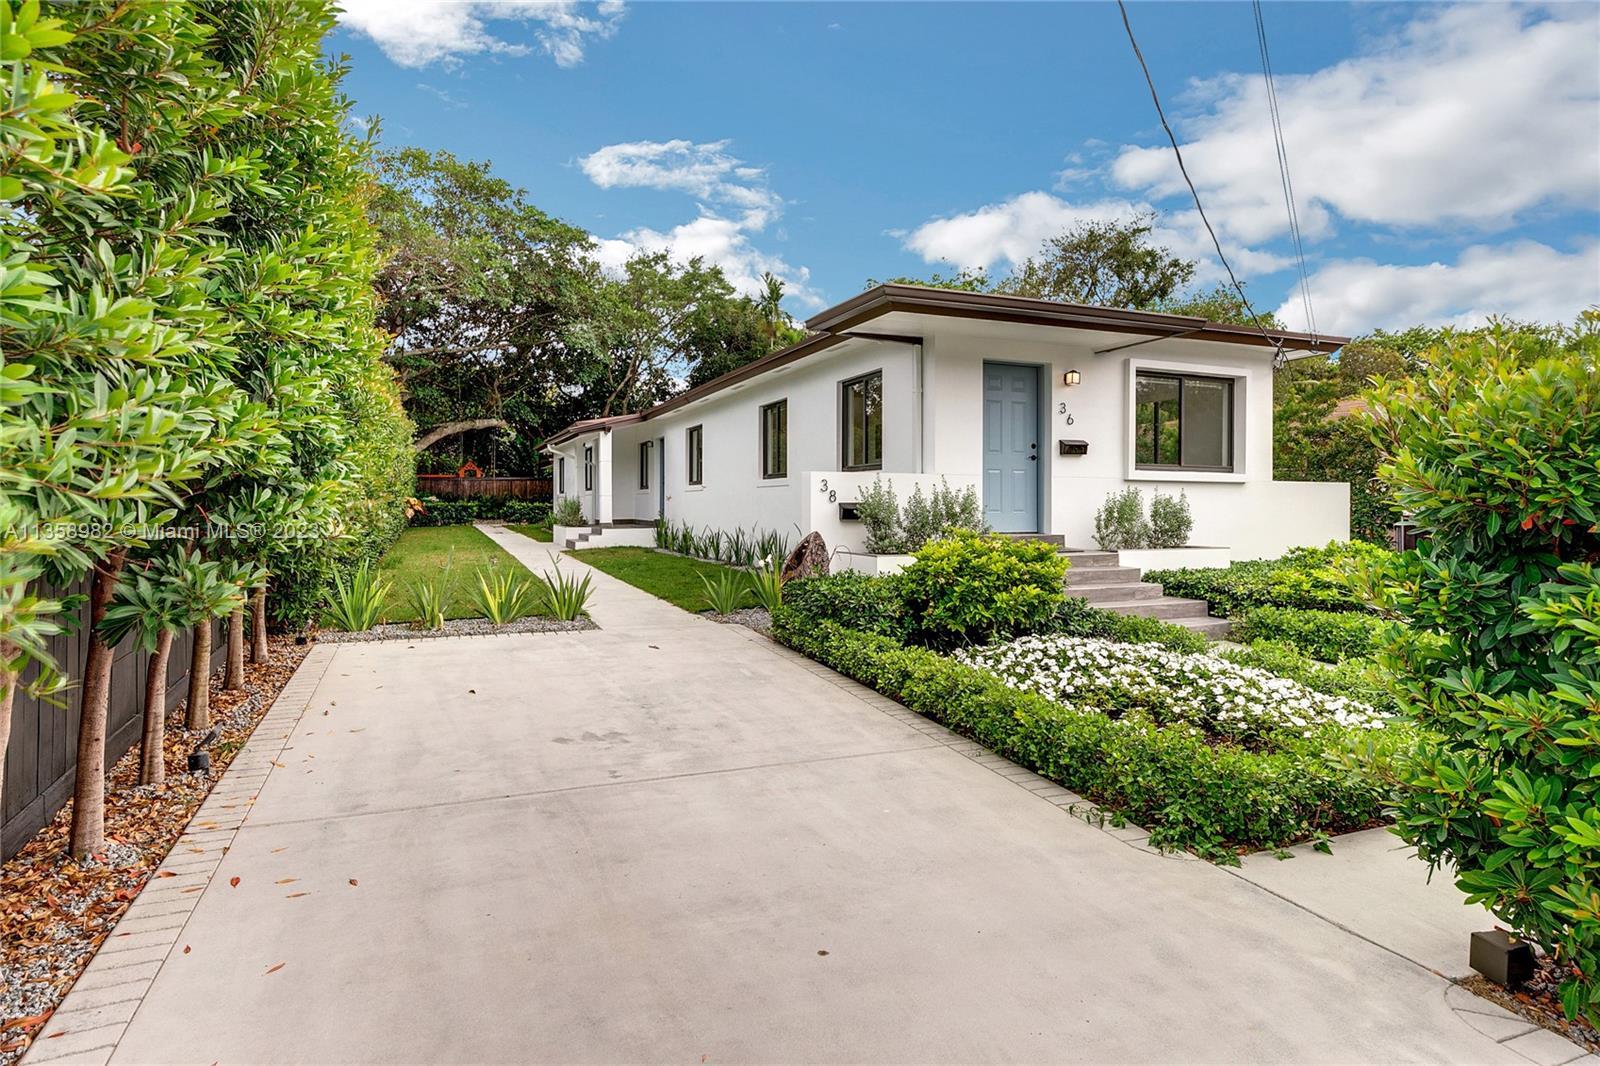 Photo of 36 NW 52nd St in Miami, FL